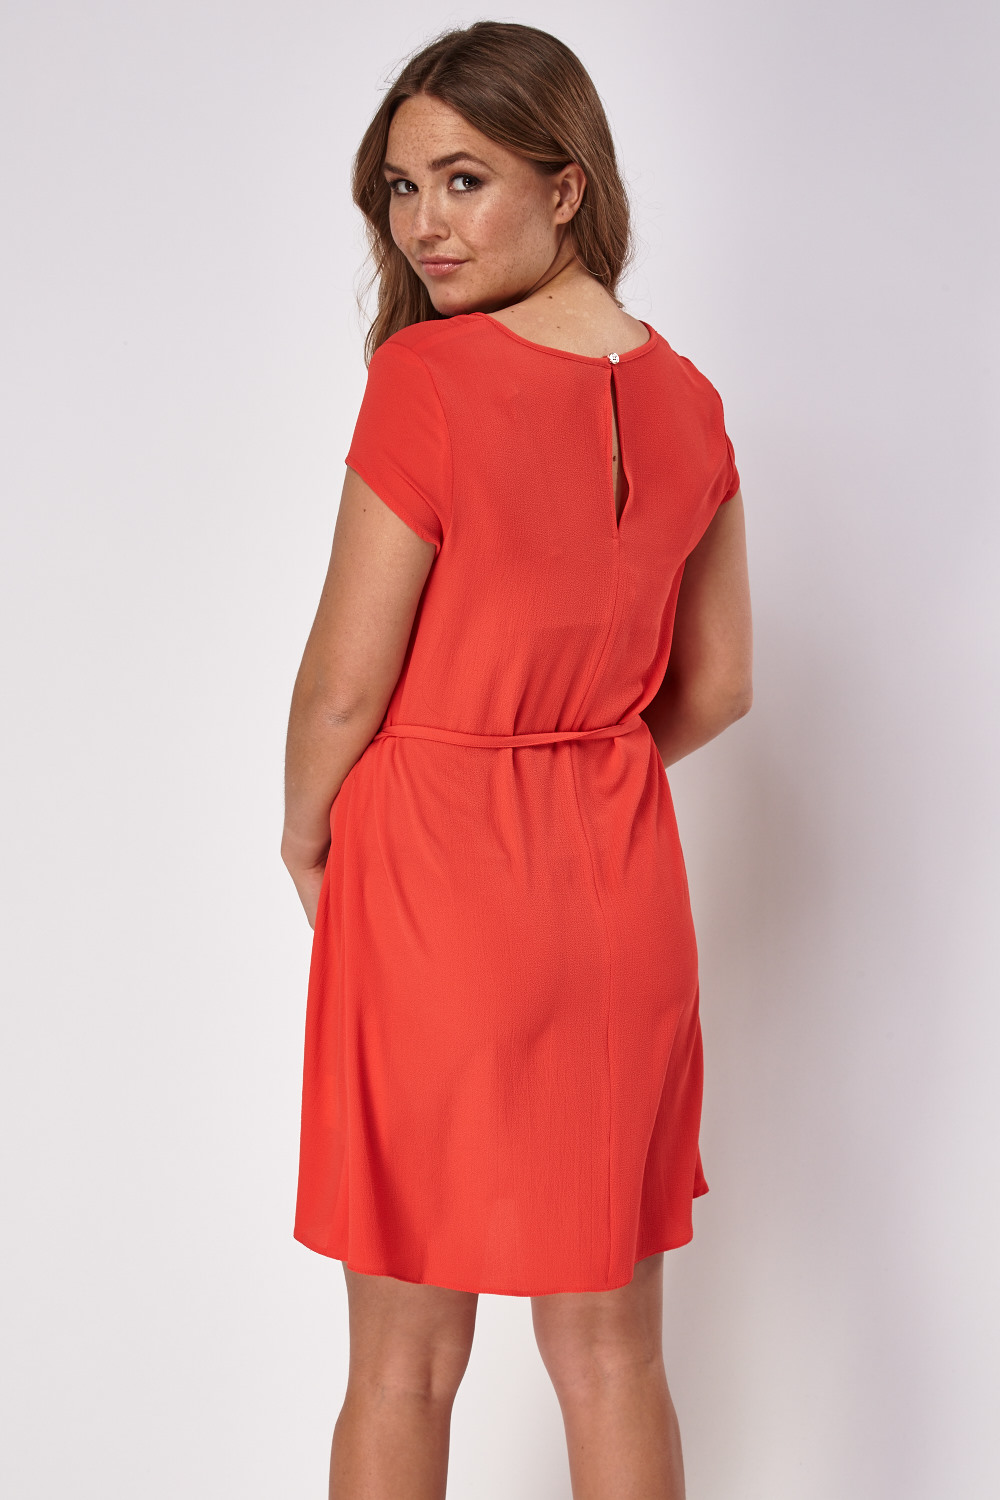 Red Textured Dress - Just $7